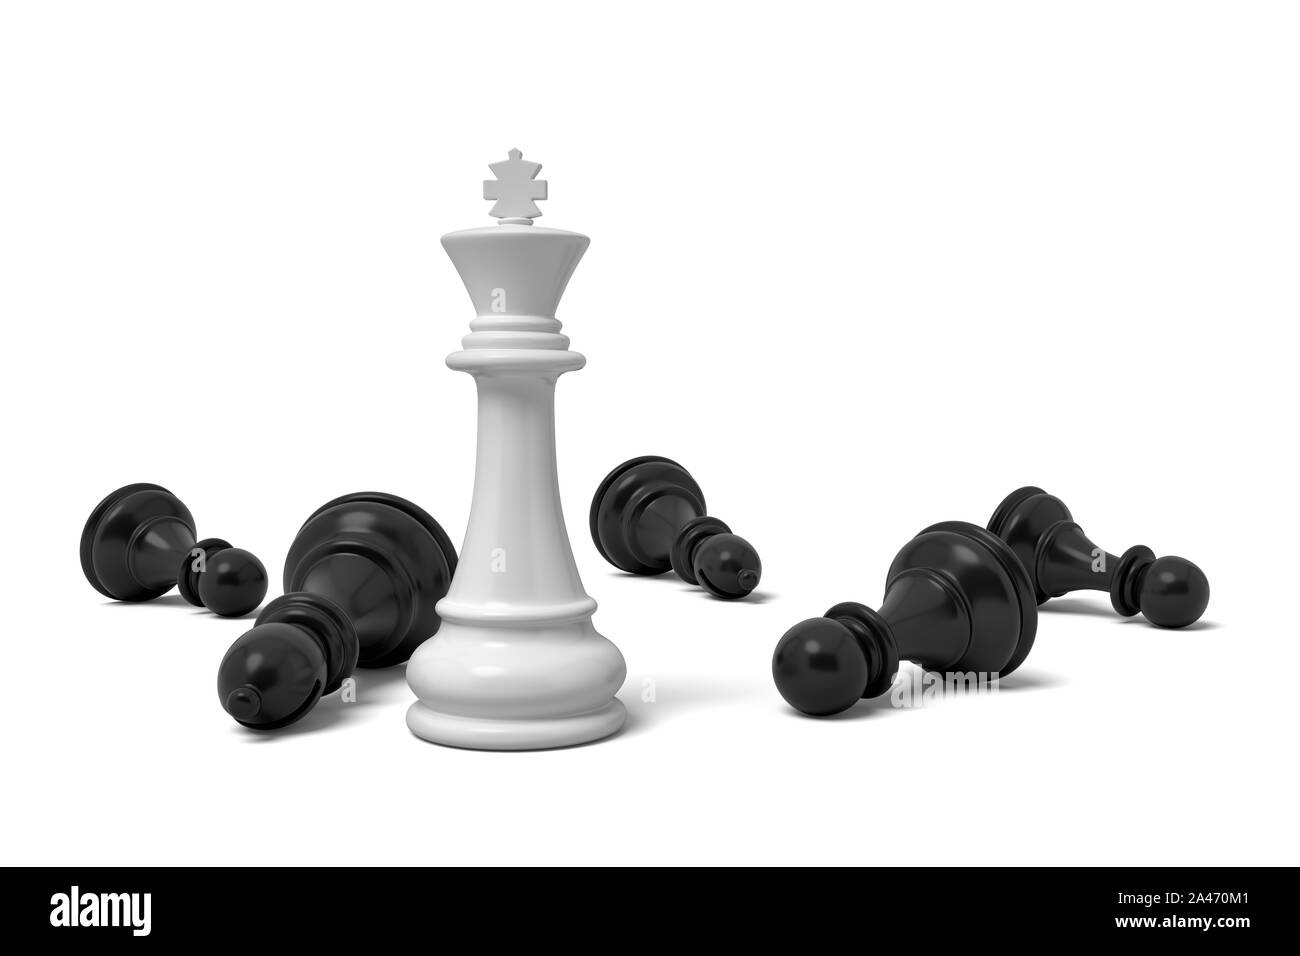 3d rendering of a single standing white chess king piece among many fallen  black pawns. Chess figures. Playing to win. Board games Stock Photo - Alamy